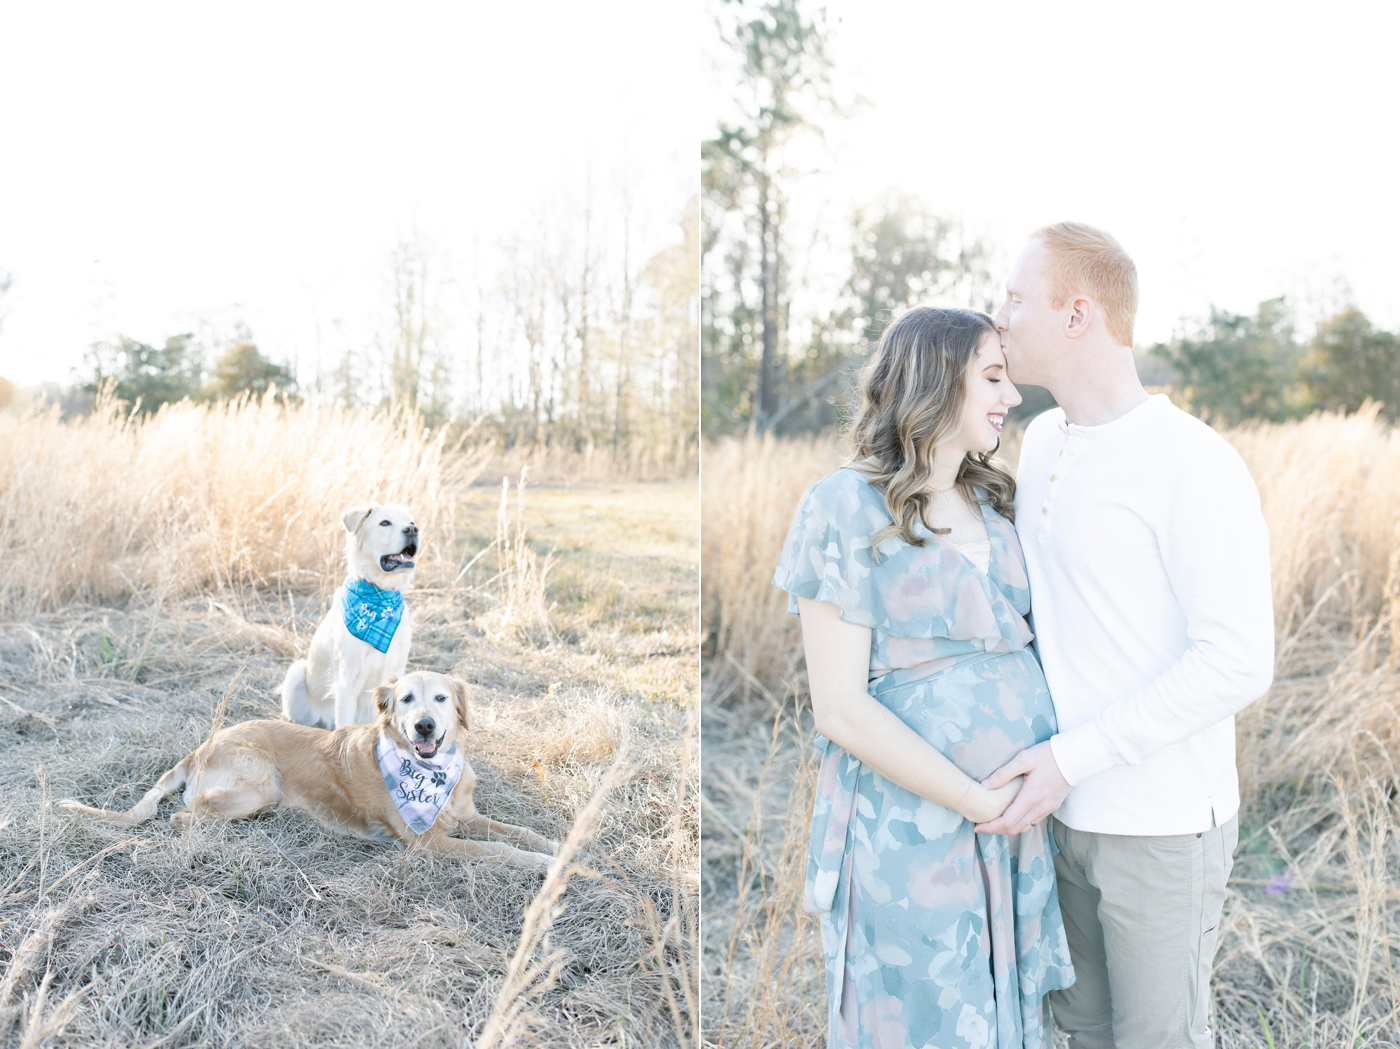 Sunset field maternity session with fur-babies. Photo by Little Sunshine Photography.